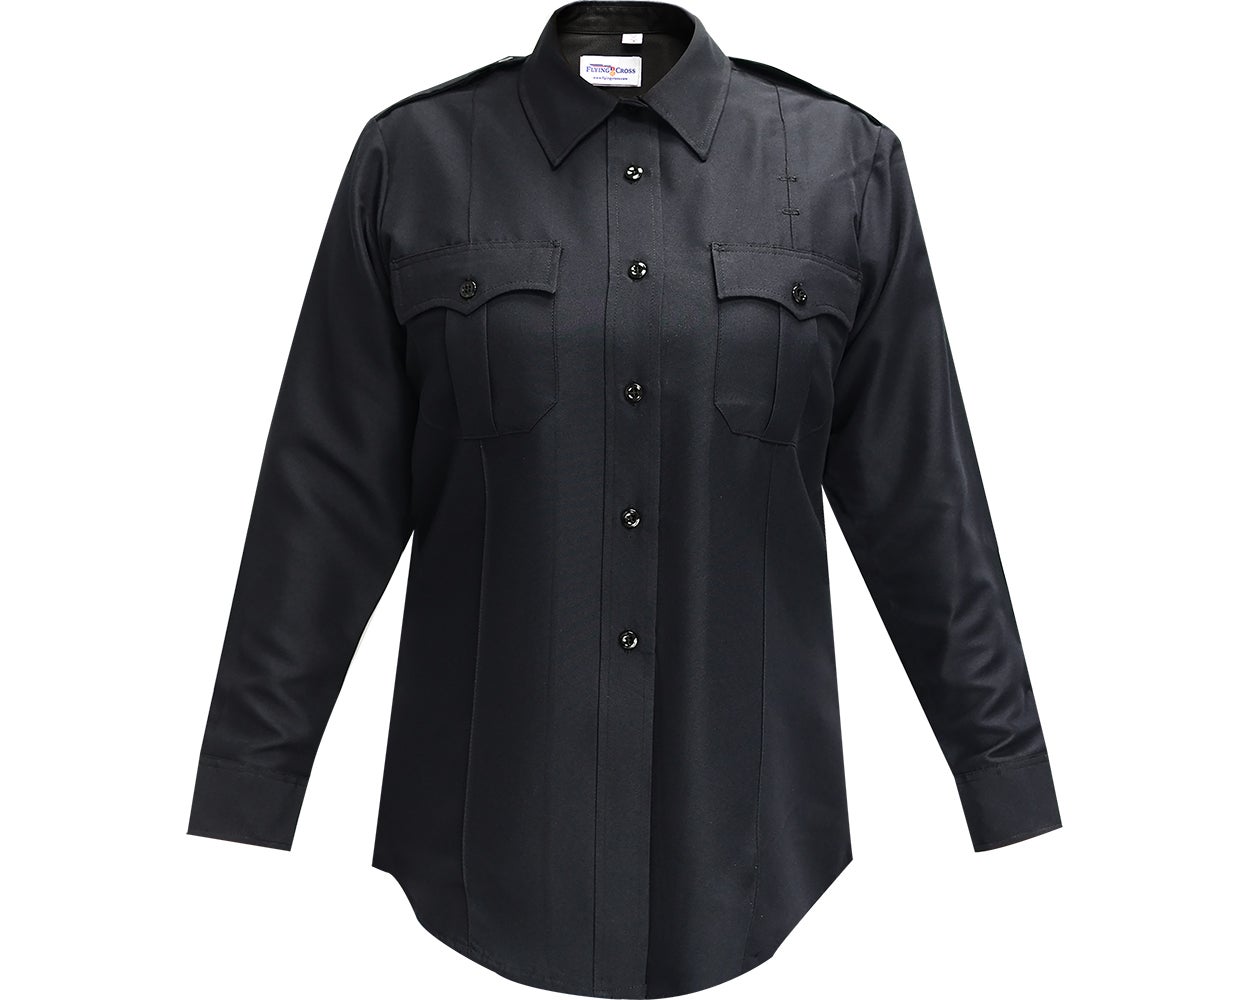 Flying Cross Command Women's Long Sleeve Shirt 126R78 - Clothing & Accessories